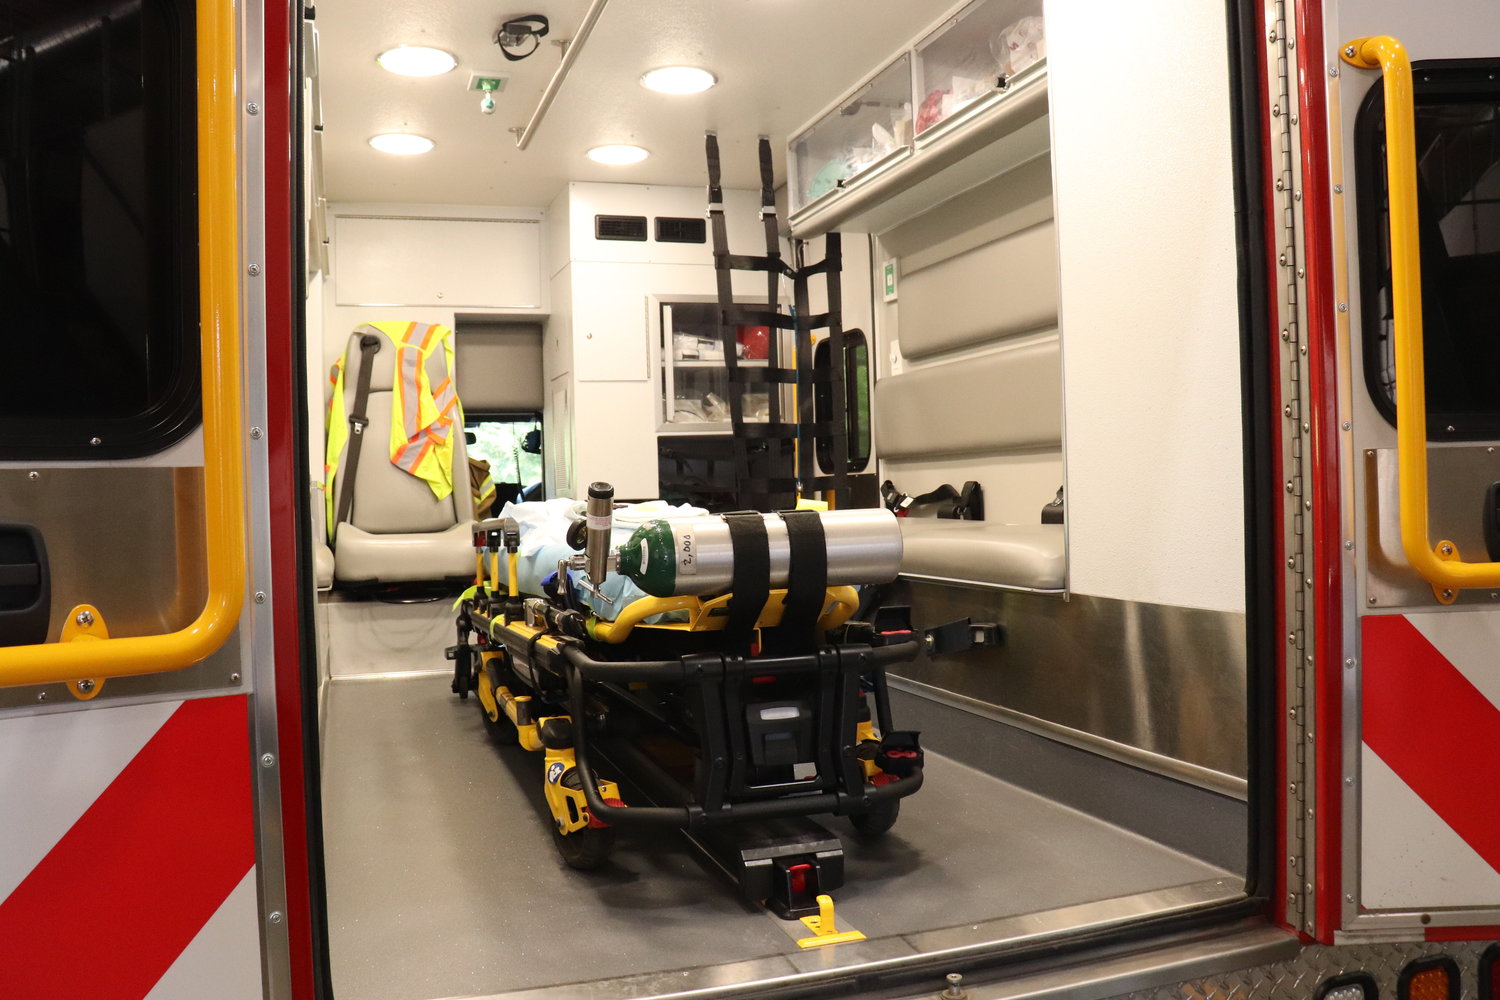 An open ambulance is pictured.